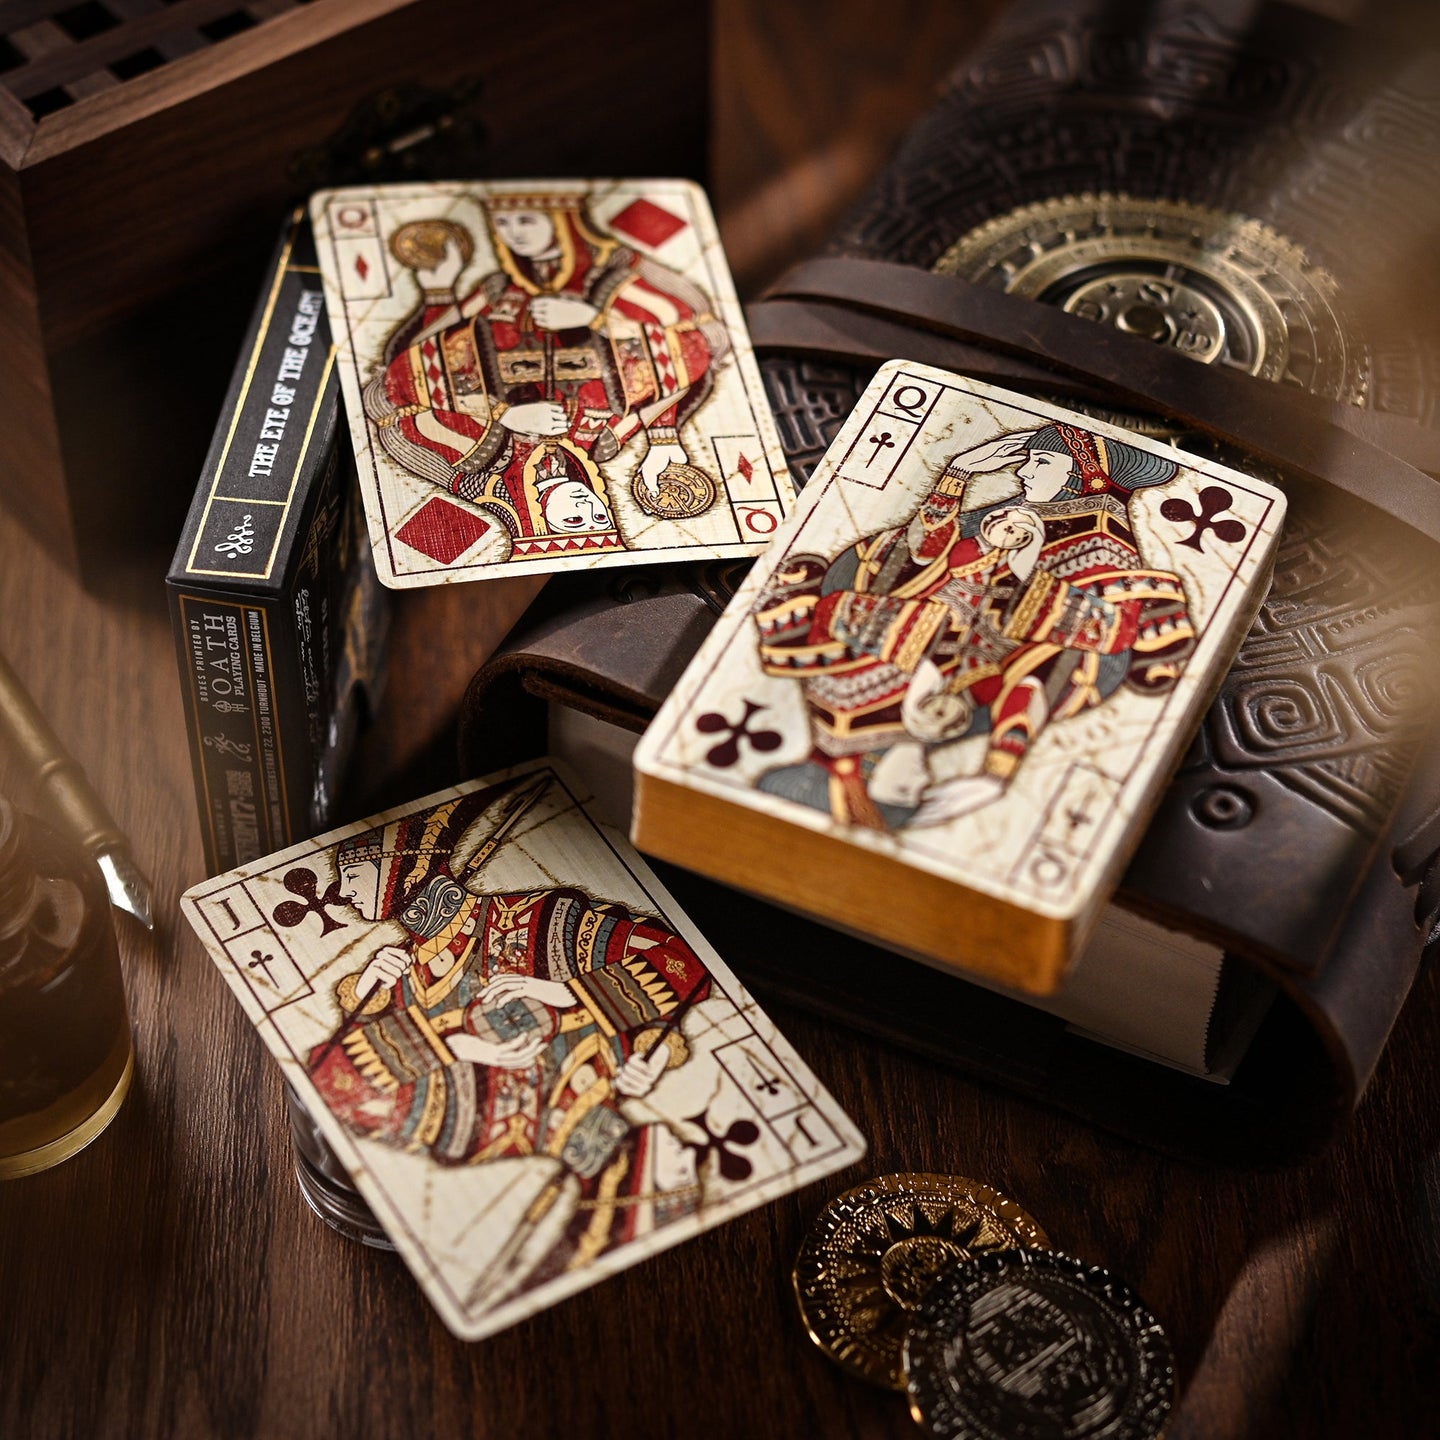 Stockholm 17 playing cards